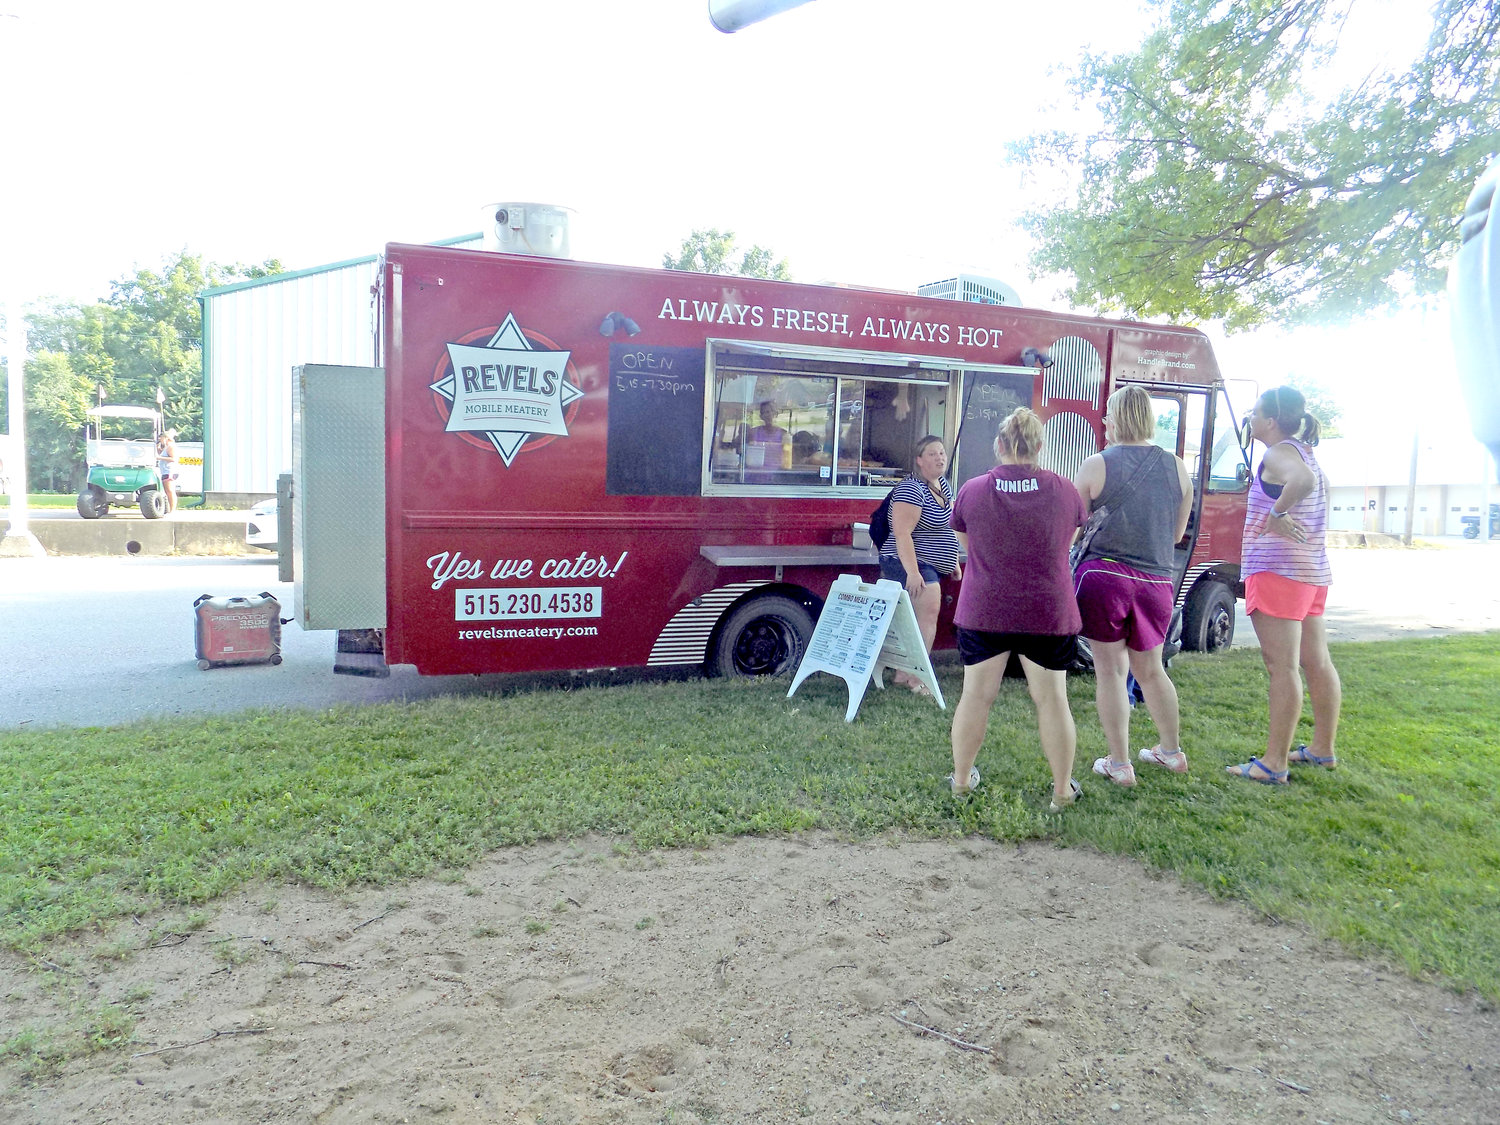 Revels Mobile Meatery satisfied appetites on the warm Tuesday evening